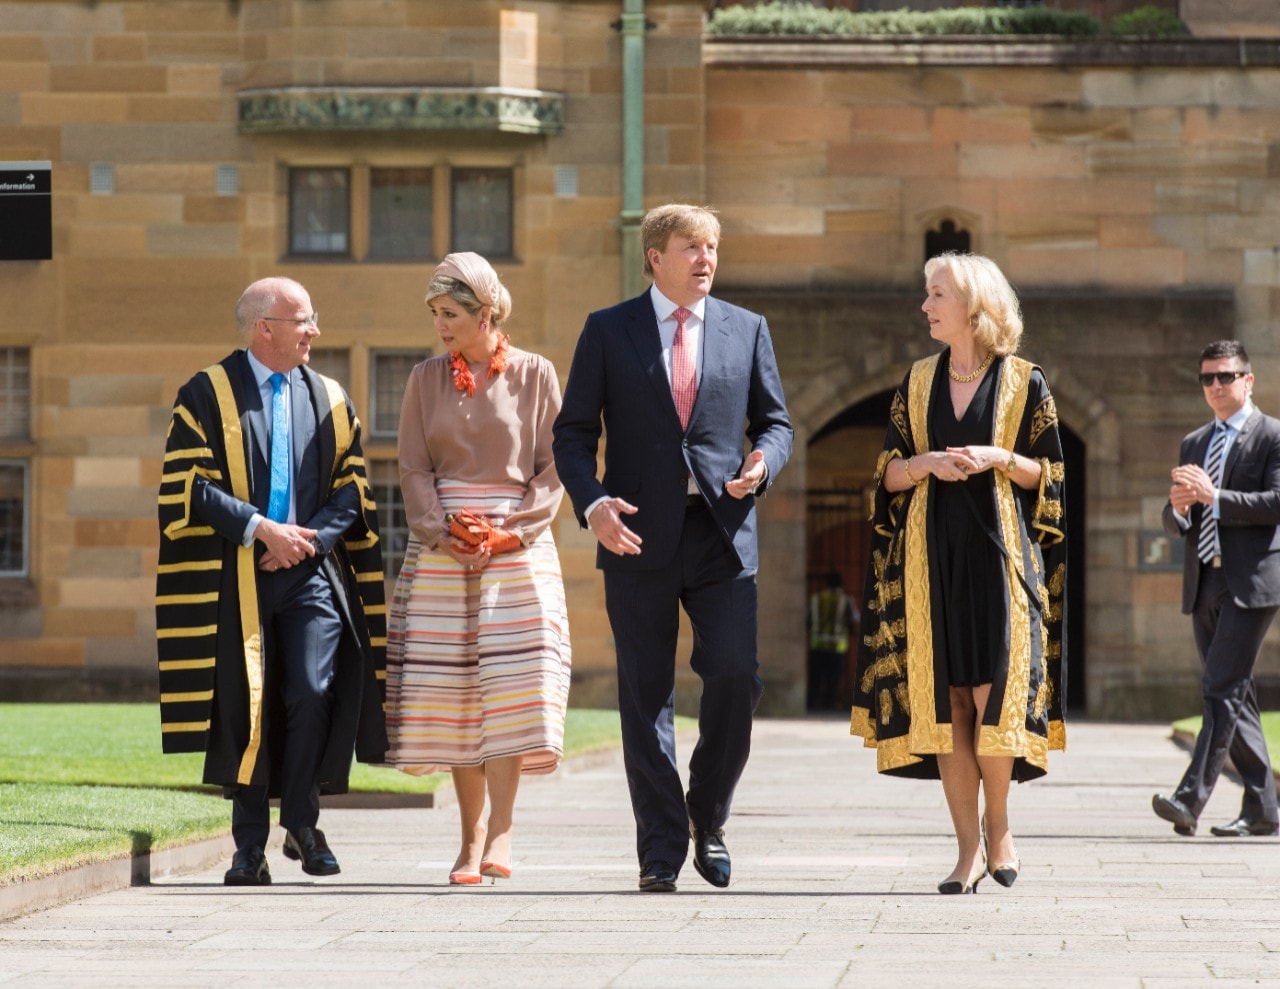 His Majesty King Willem-Alexander and Her Majesty Queen Máxima of The Netherlands were hosted by the University of Sydney's Chancellor Belinda Hutchinson AM and Vice-Chancellor Dr Michael Spence.